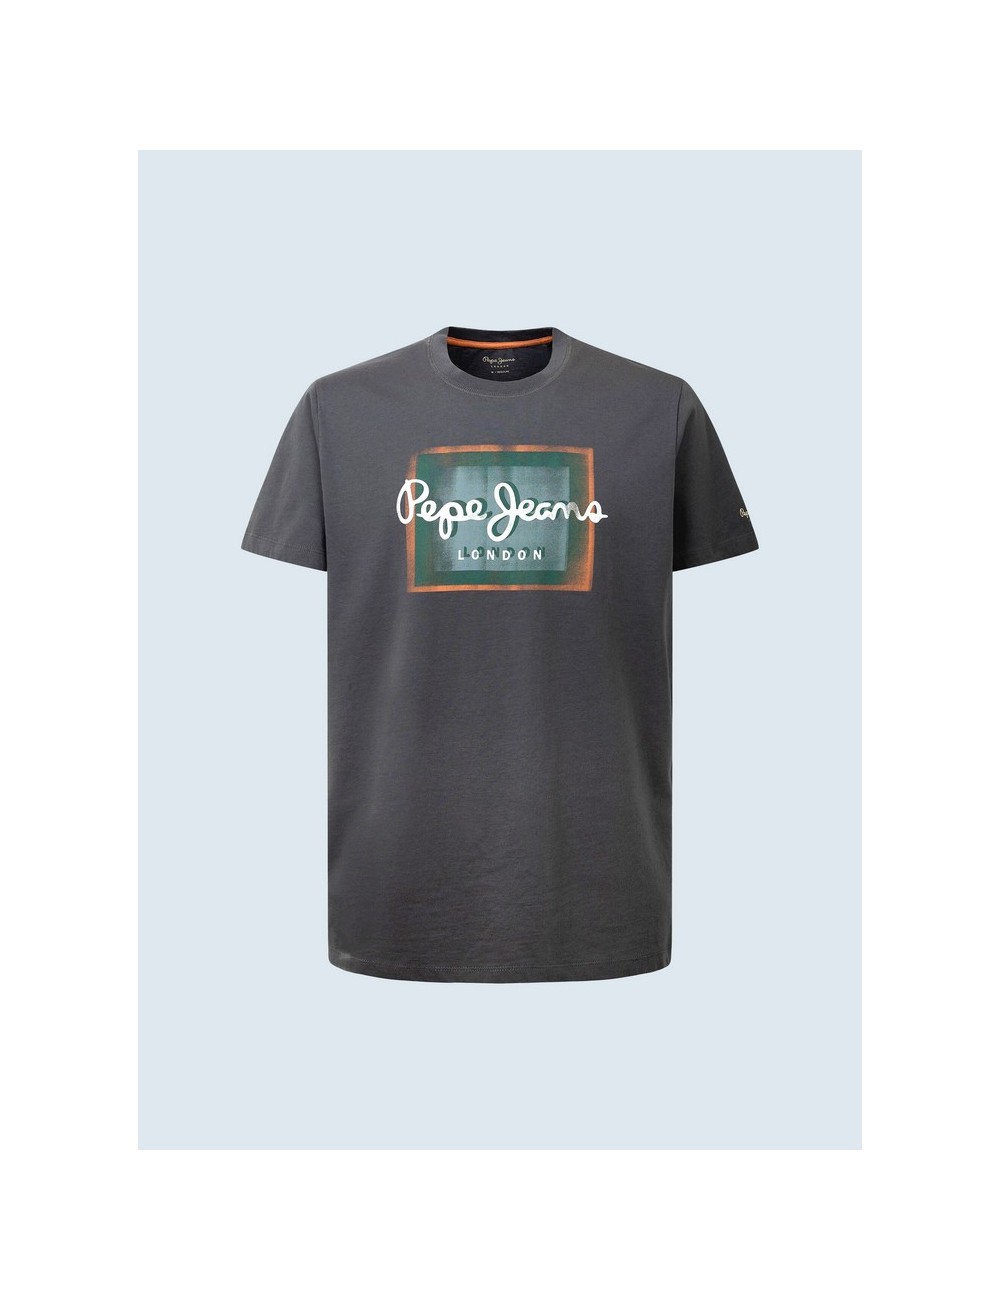 CAMISETA HOMBRE PEPE JEANS WESLEY GRIS